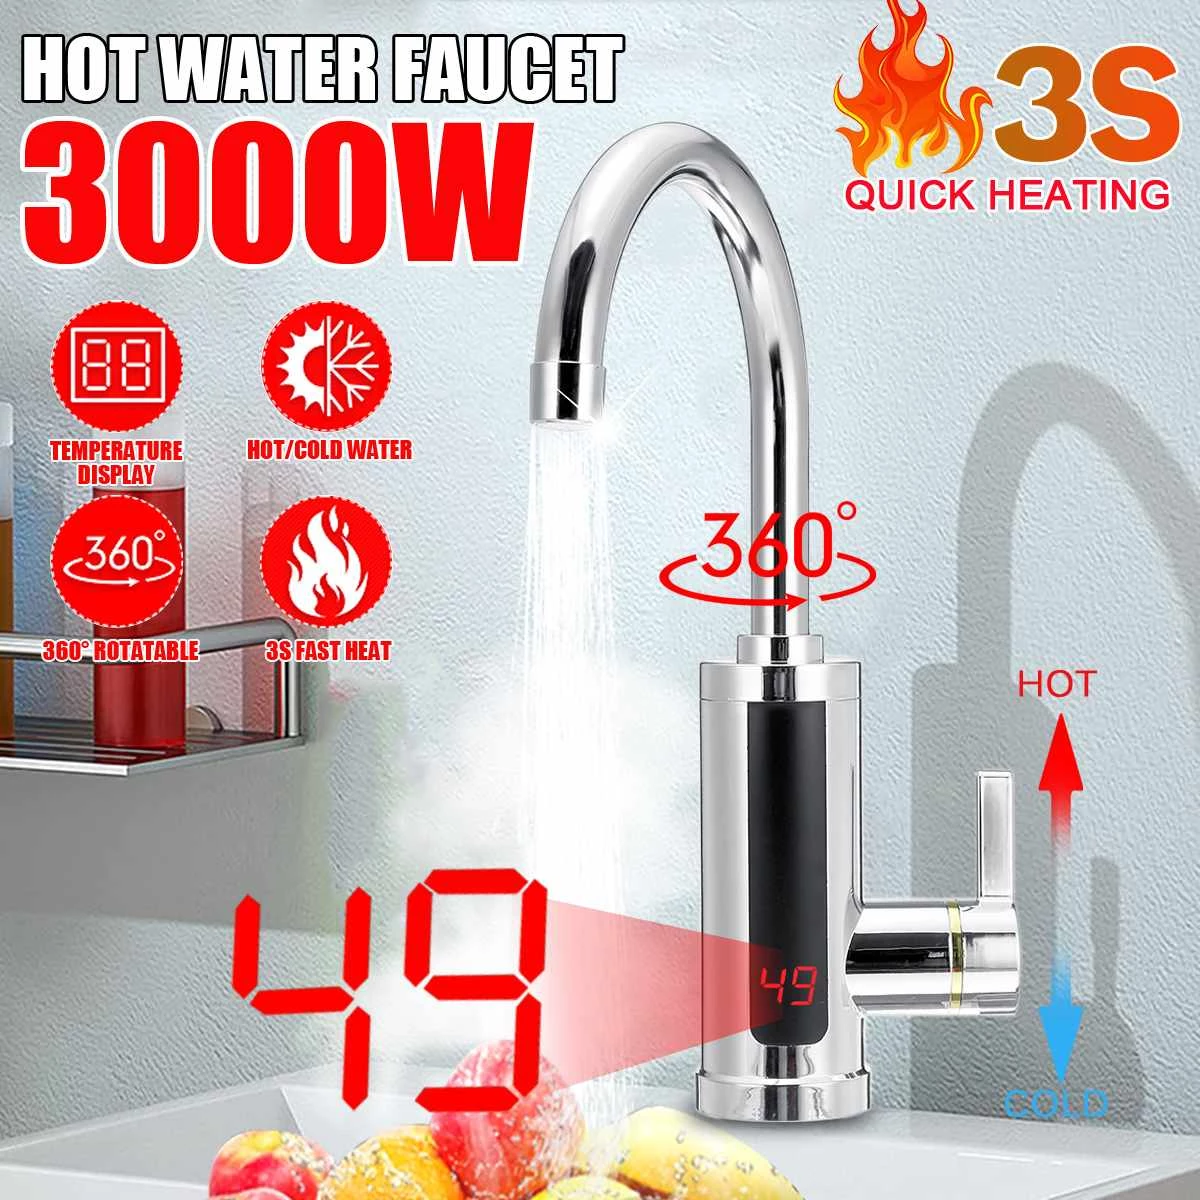 3000W 220V Electric Kitchen Water Heater Tap Instant Hot Water Faucet Heater Cold Heating Faucet Tankless